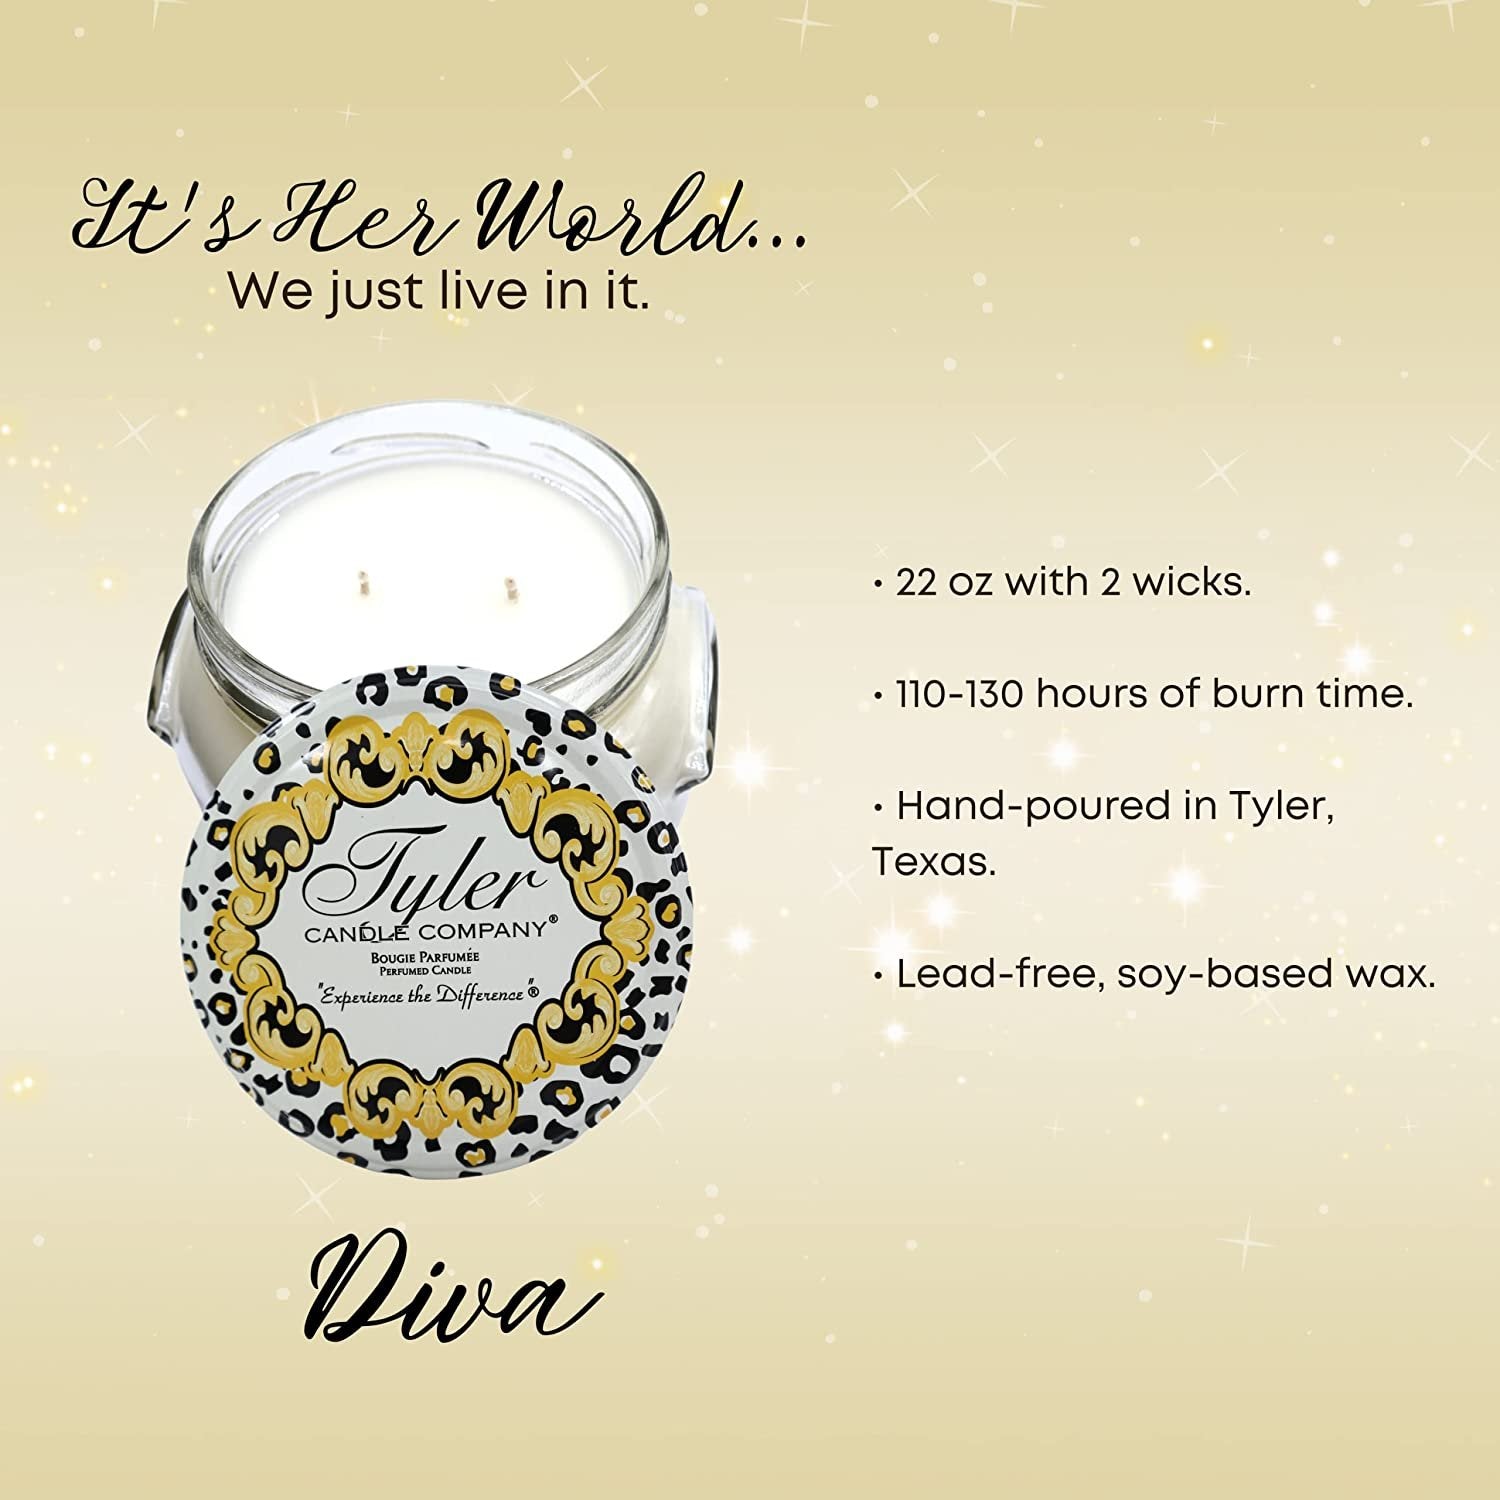 Tyler Candle Company Diva Jar Candle - Luxurious Scented Candle with Essential Oils - Long Burning Candles 110-120 Hours - Large Candle 22 oz with Bonus Worldwide Nutrition Multi Purpose Key Chain